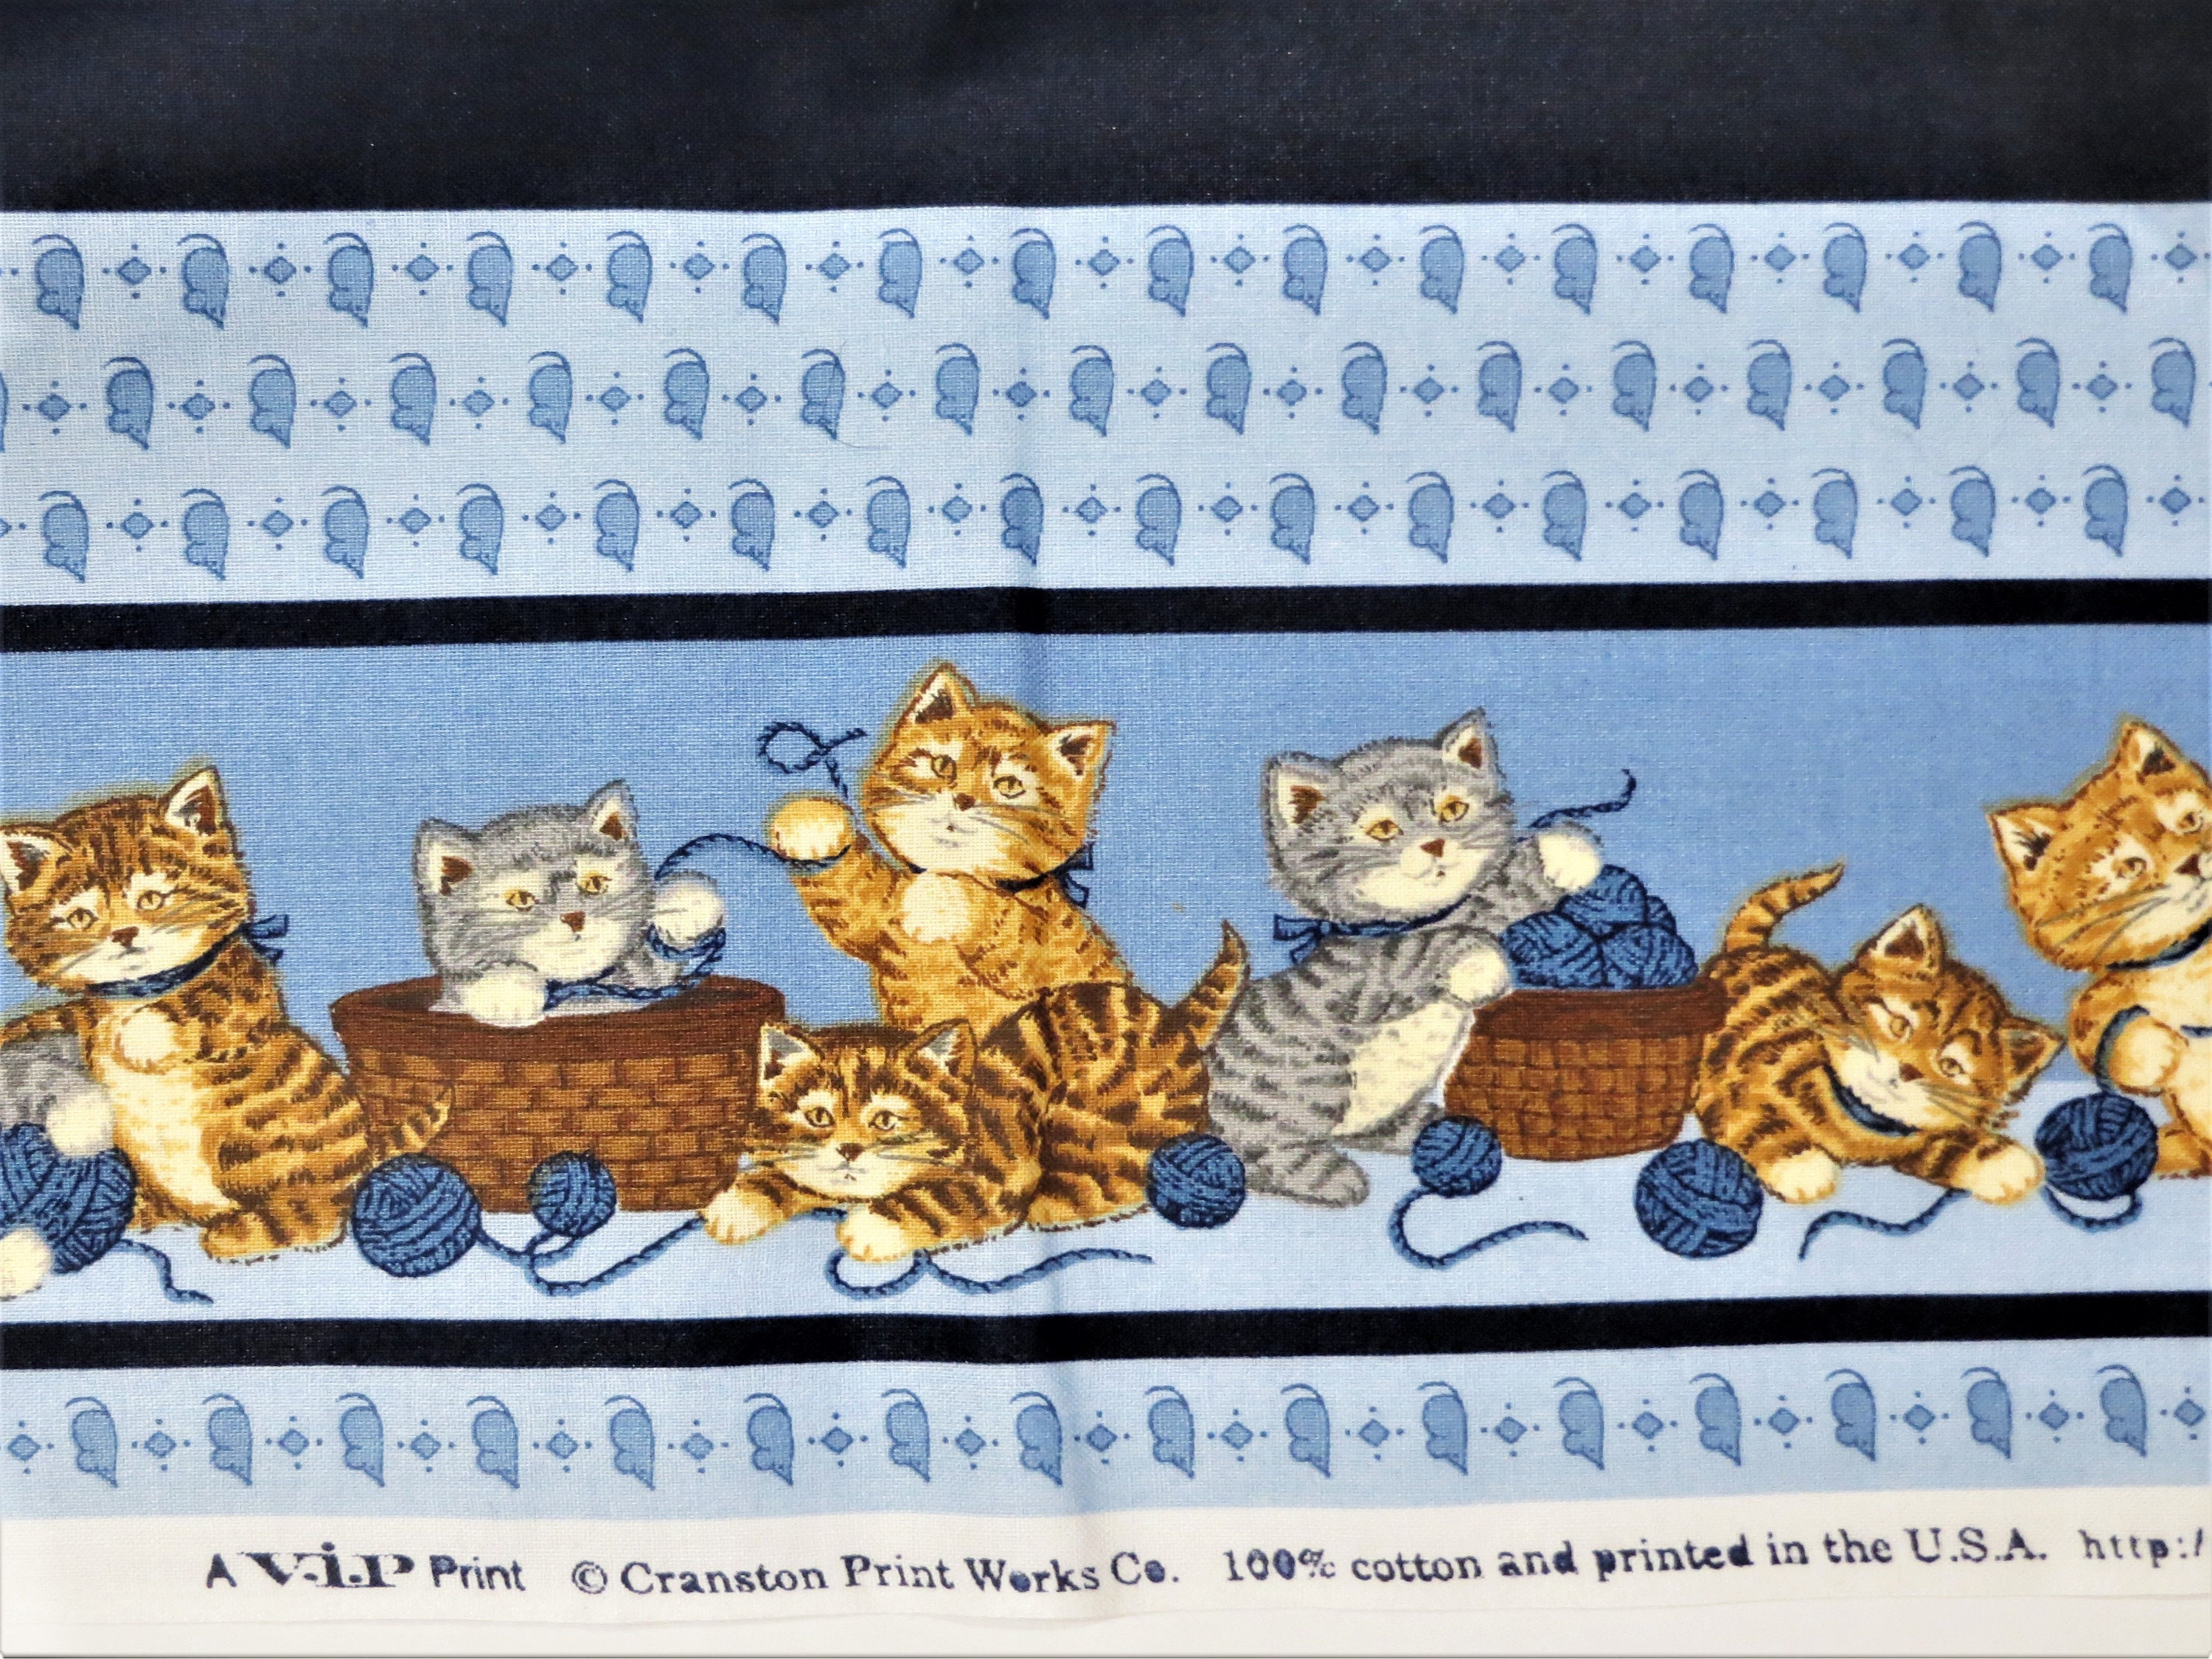 Fabric Panels Cats w Yarn Set of 4 Square 2 Designs Blue & Brown